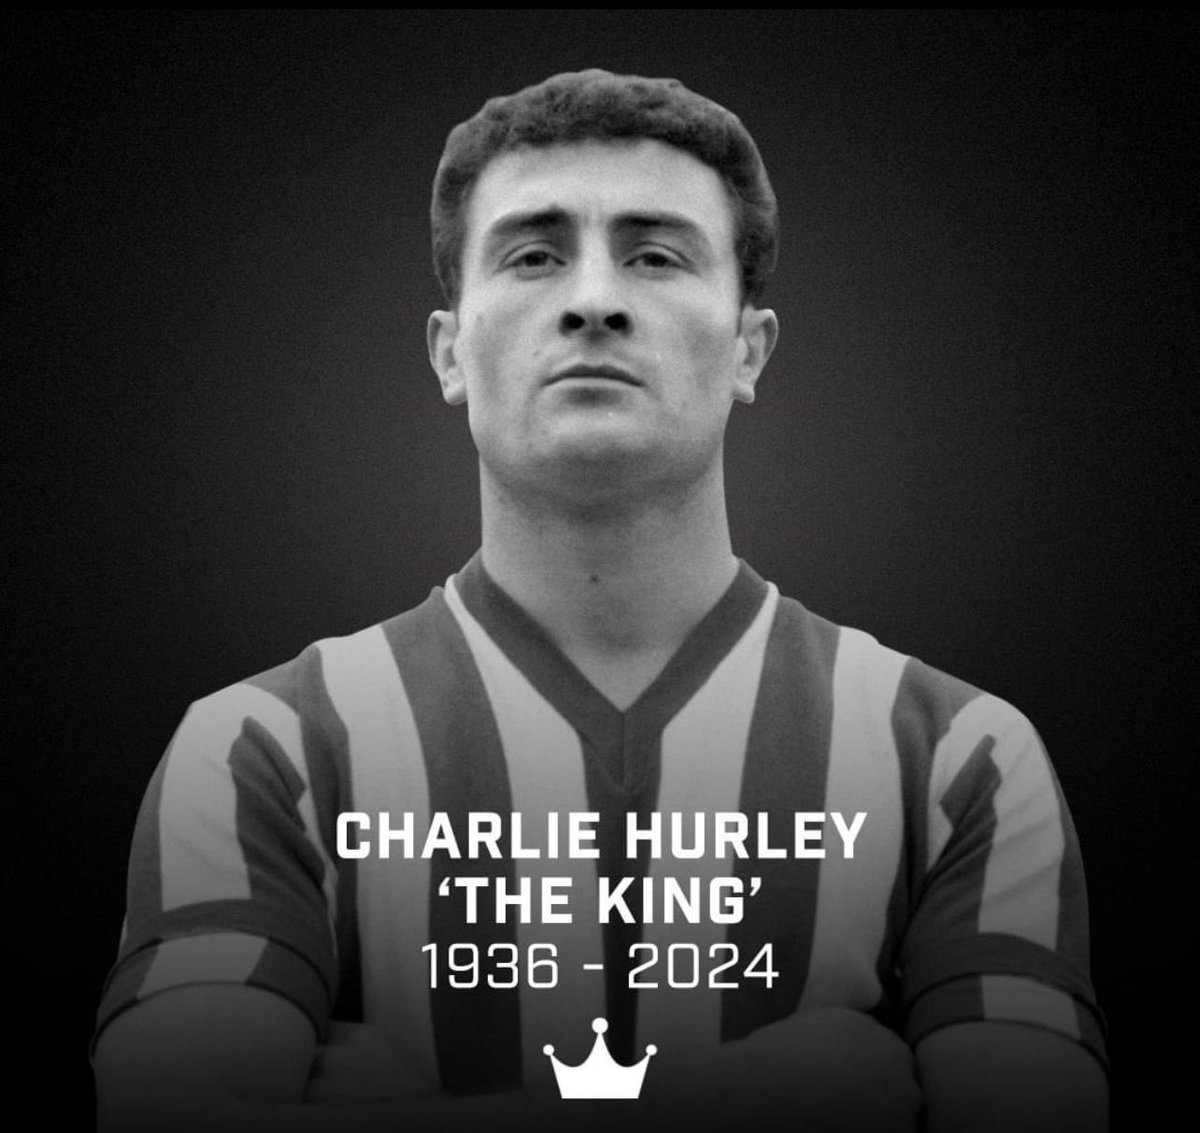 I’m sorry to learn of the passing of #SAFC legend, Charlie Hurley. Charlie was affectionately known by Sunderland fans as The King and was voted the clubs Player of the Century by fans. RIP